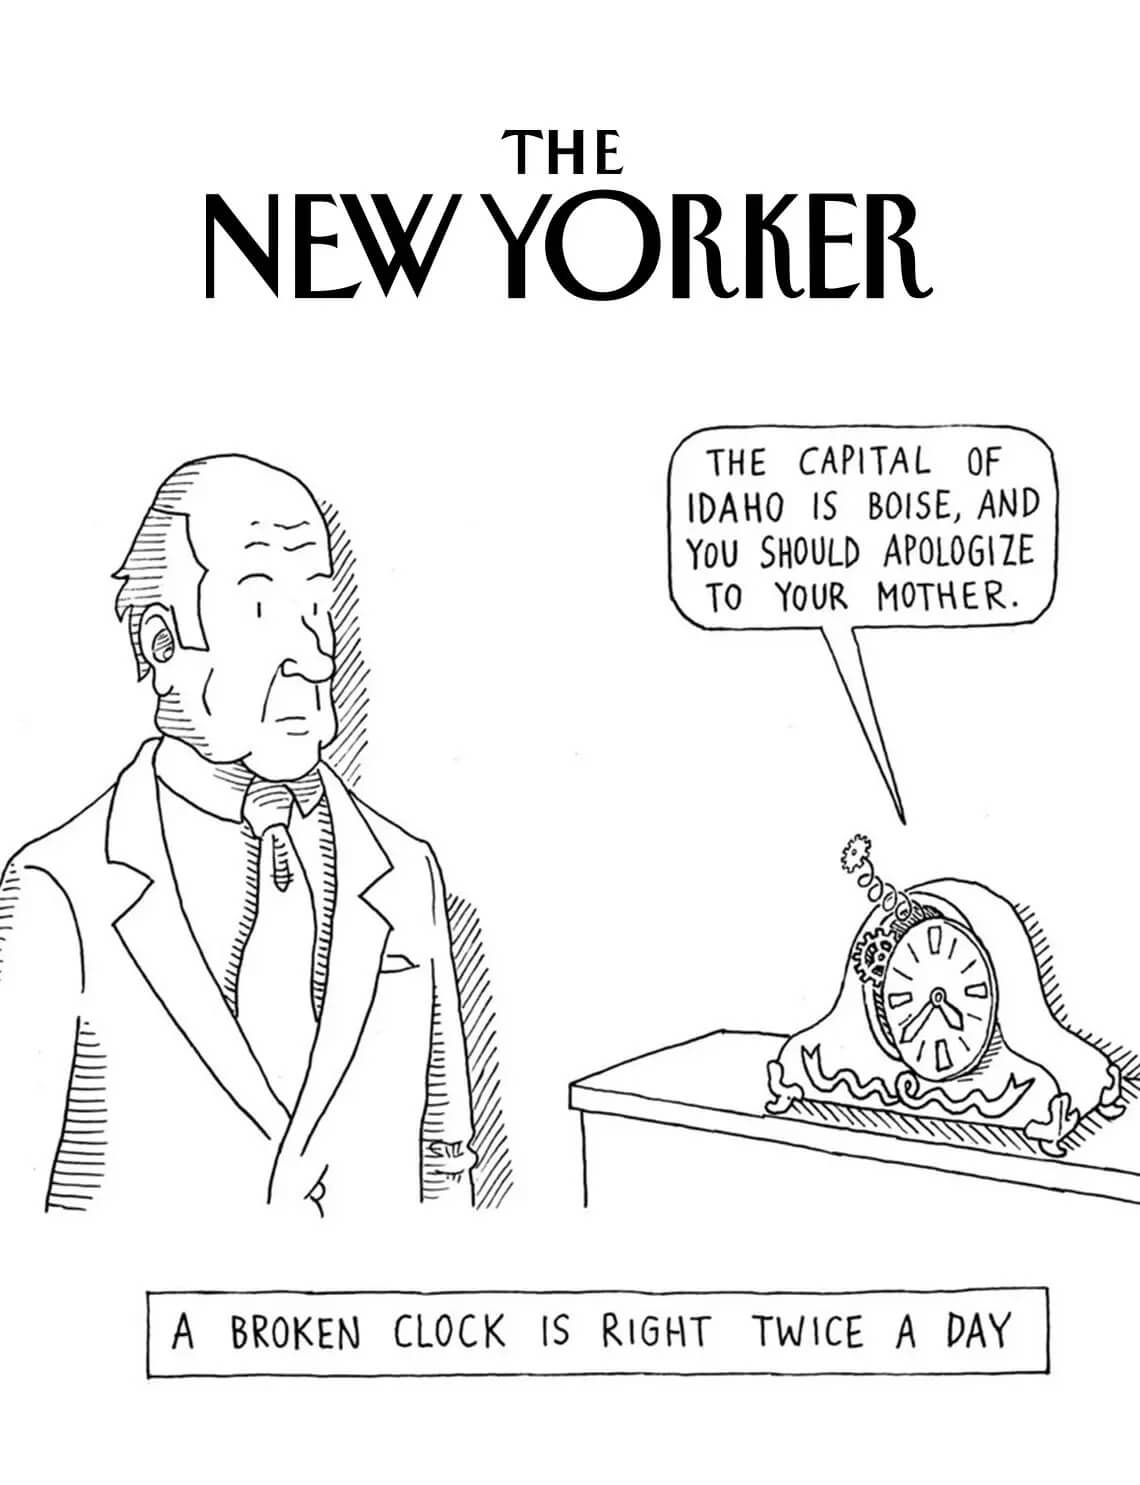 the-new-yorker-local-print-advertising-1140x1485.